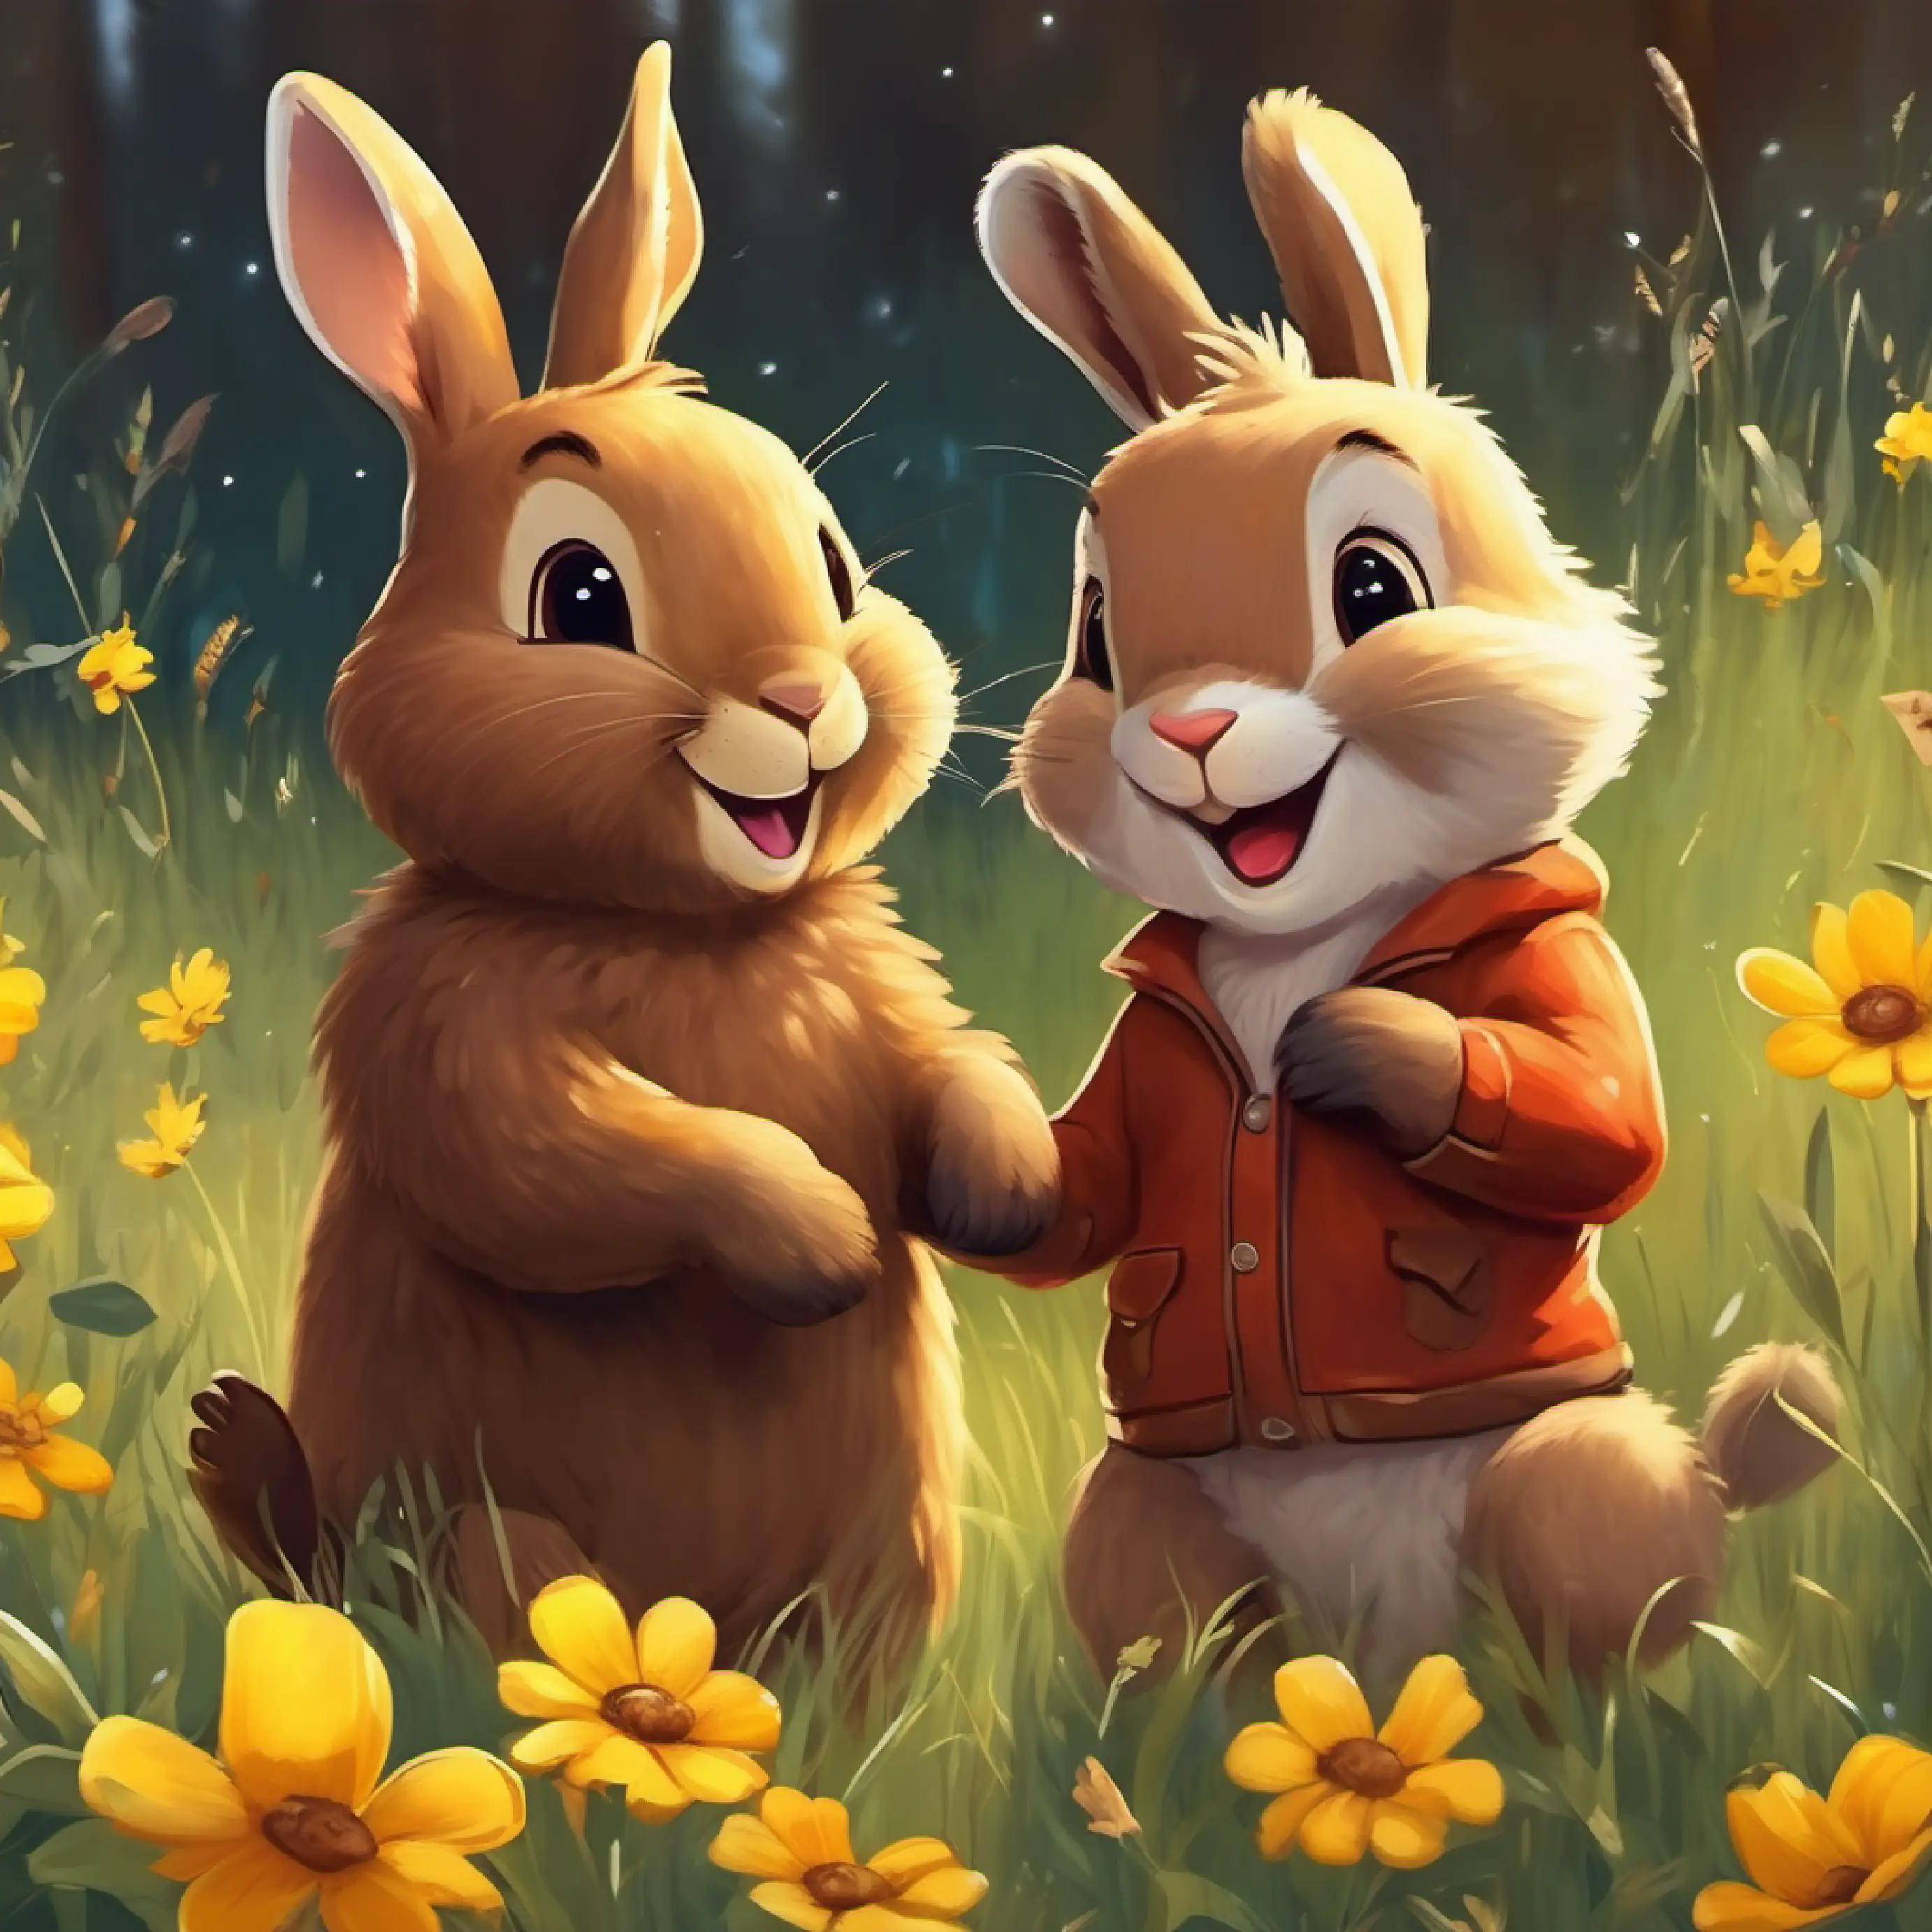  brown rabbit feeling so happy with brown bear with yellow bird smiling meadow